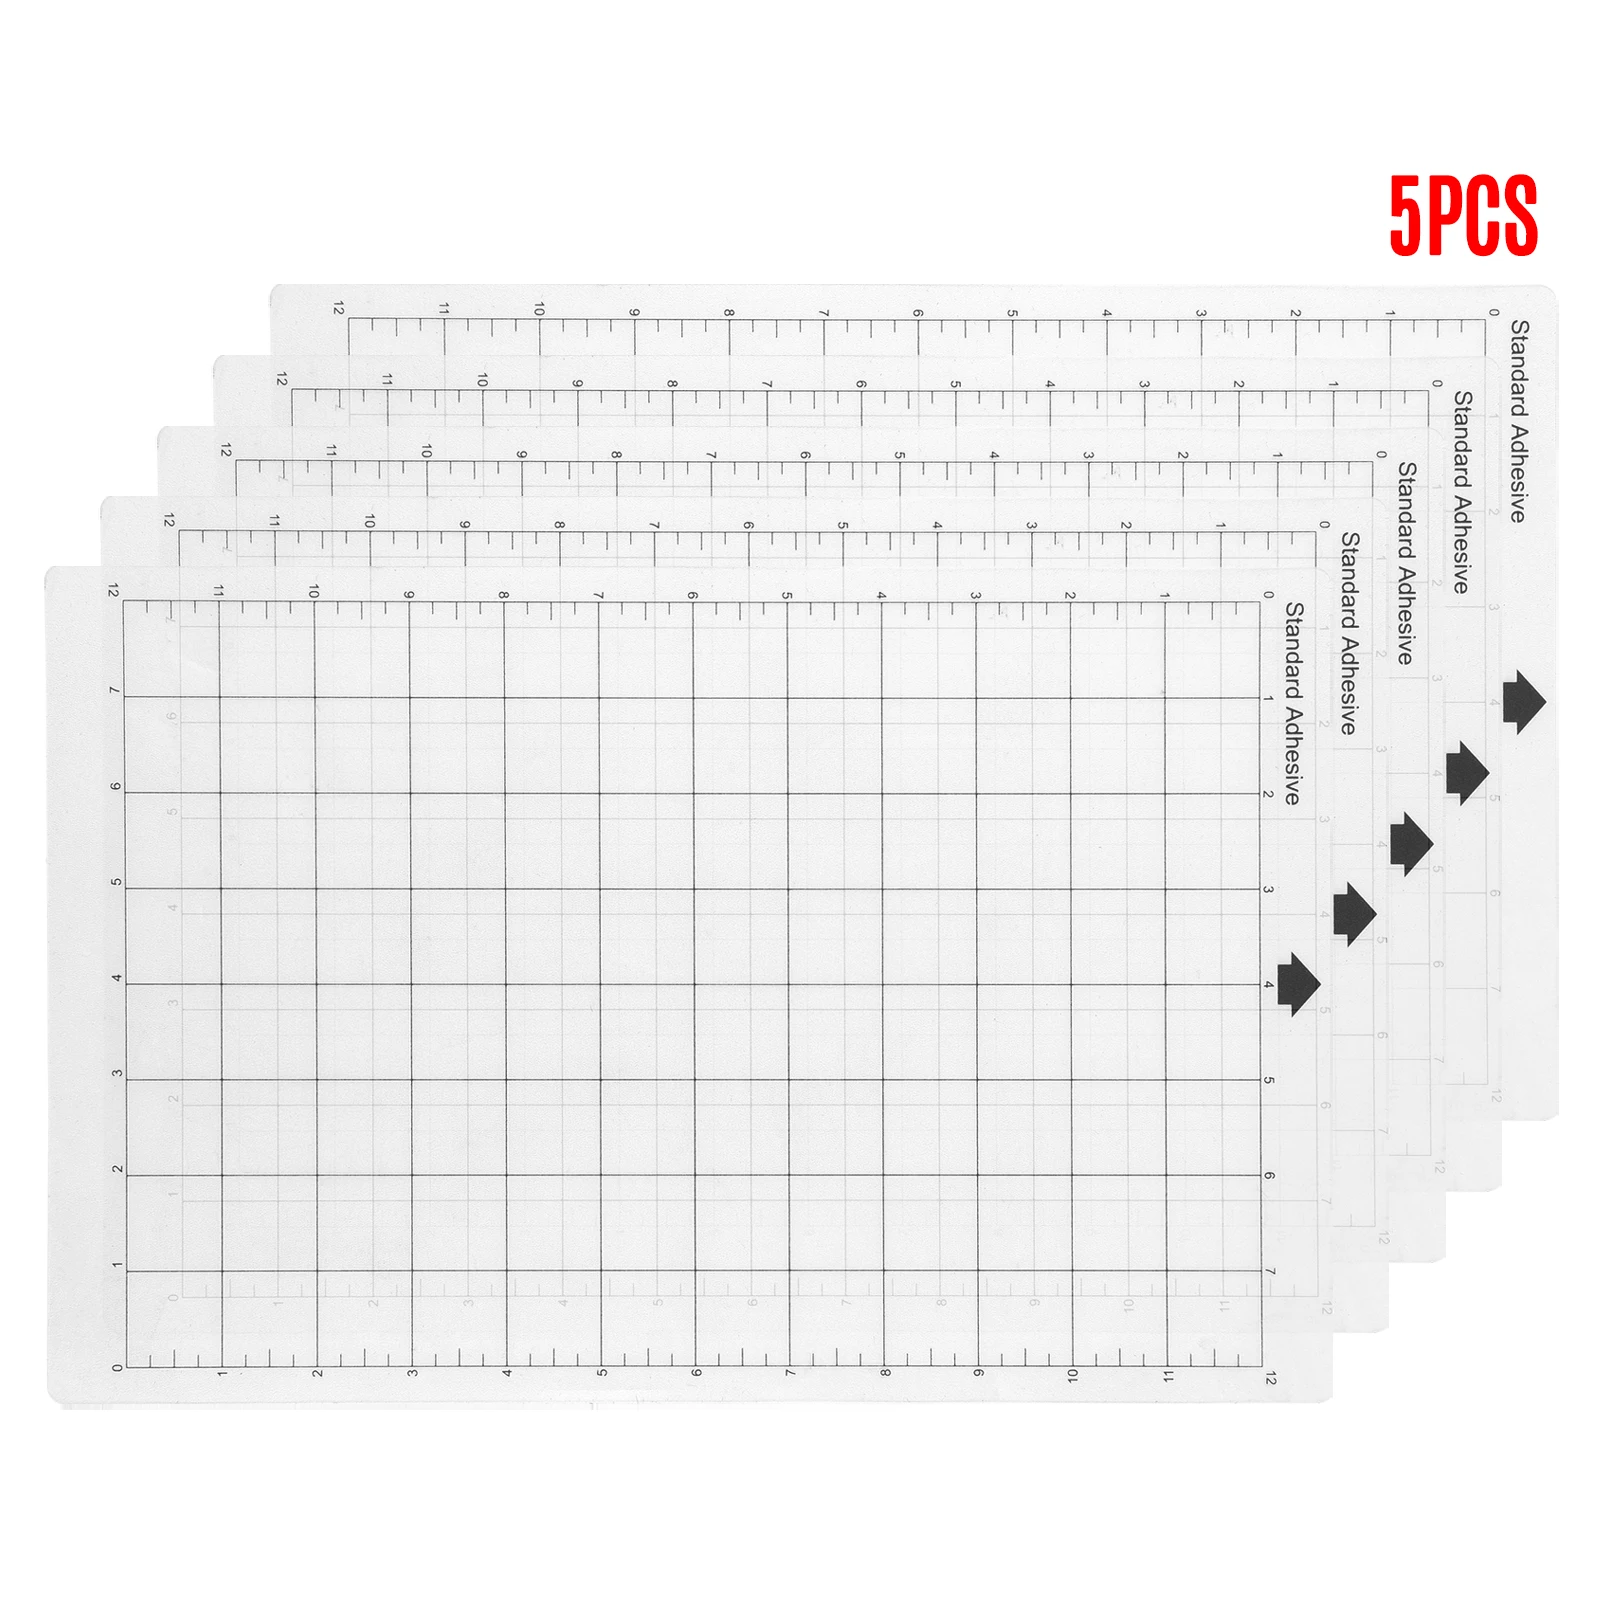 3/4PCS 12x12 Inch Replacement Cutting Mat Adhesive Non-Slip Gridded Cutting  Mats Compatible with Silhouette